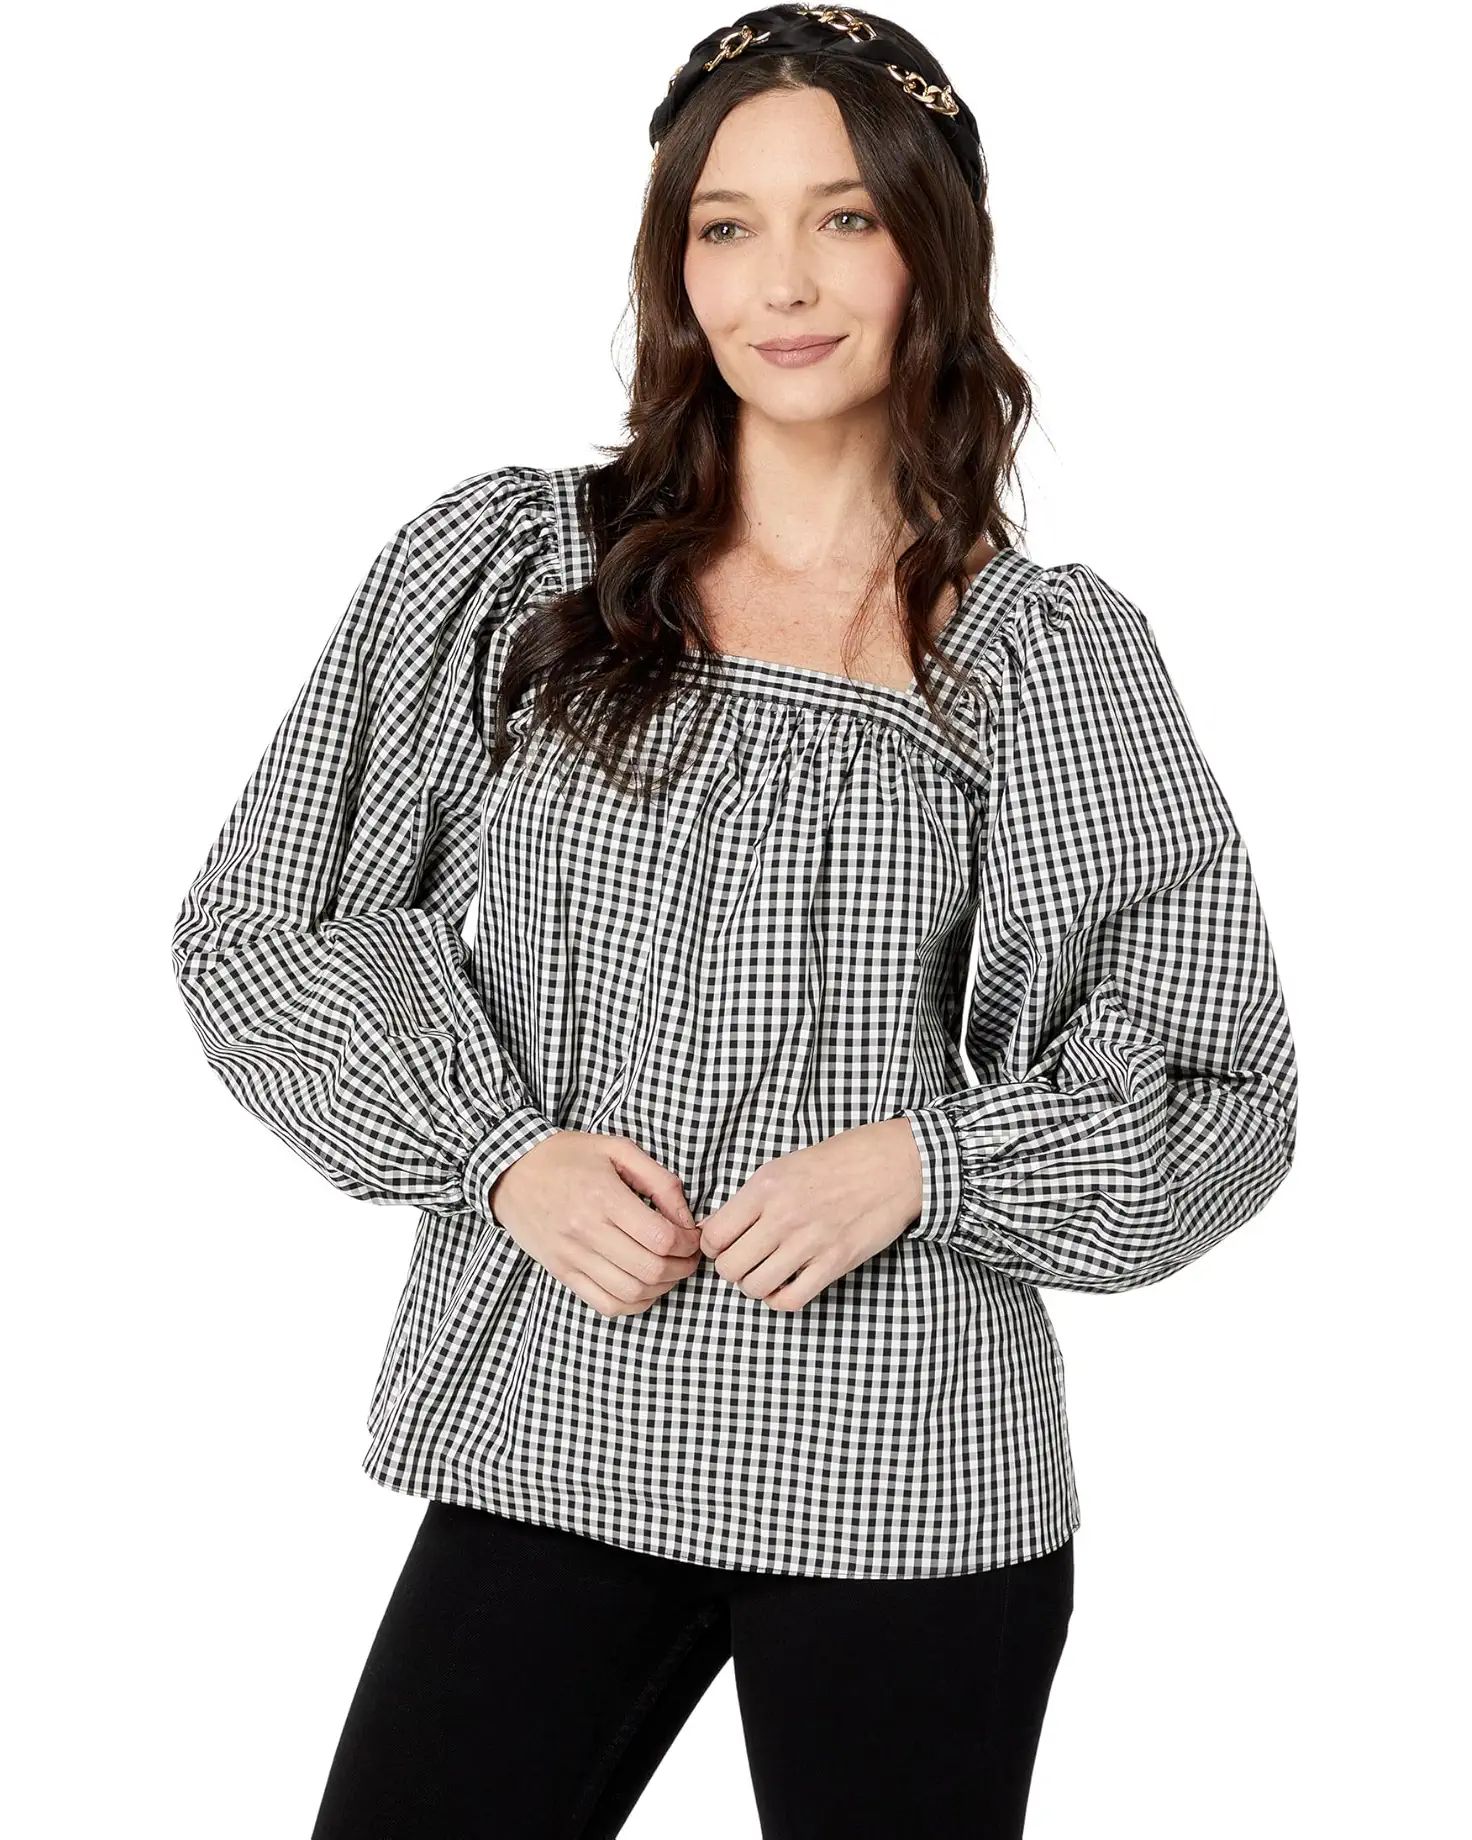 Kate Spade New York Party Gingham Belle Top | Zappos